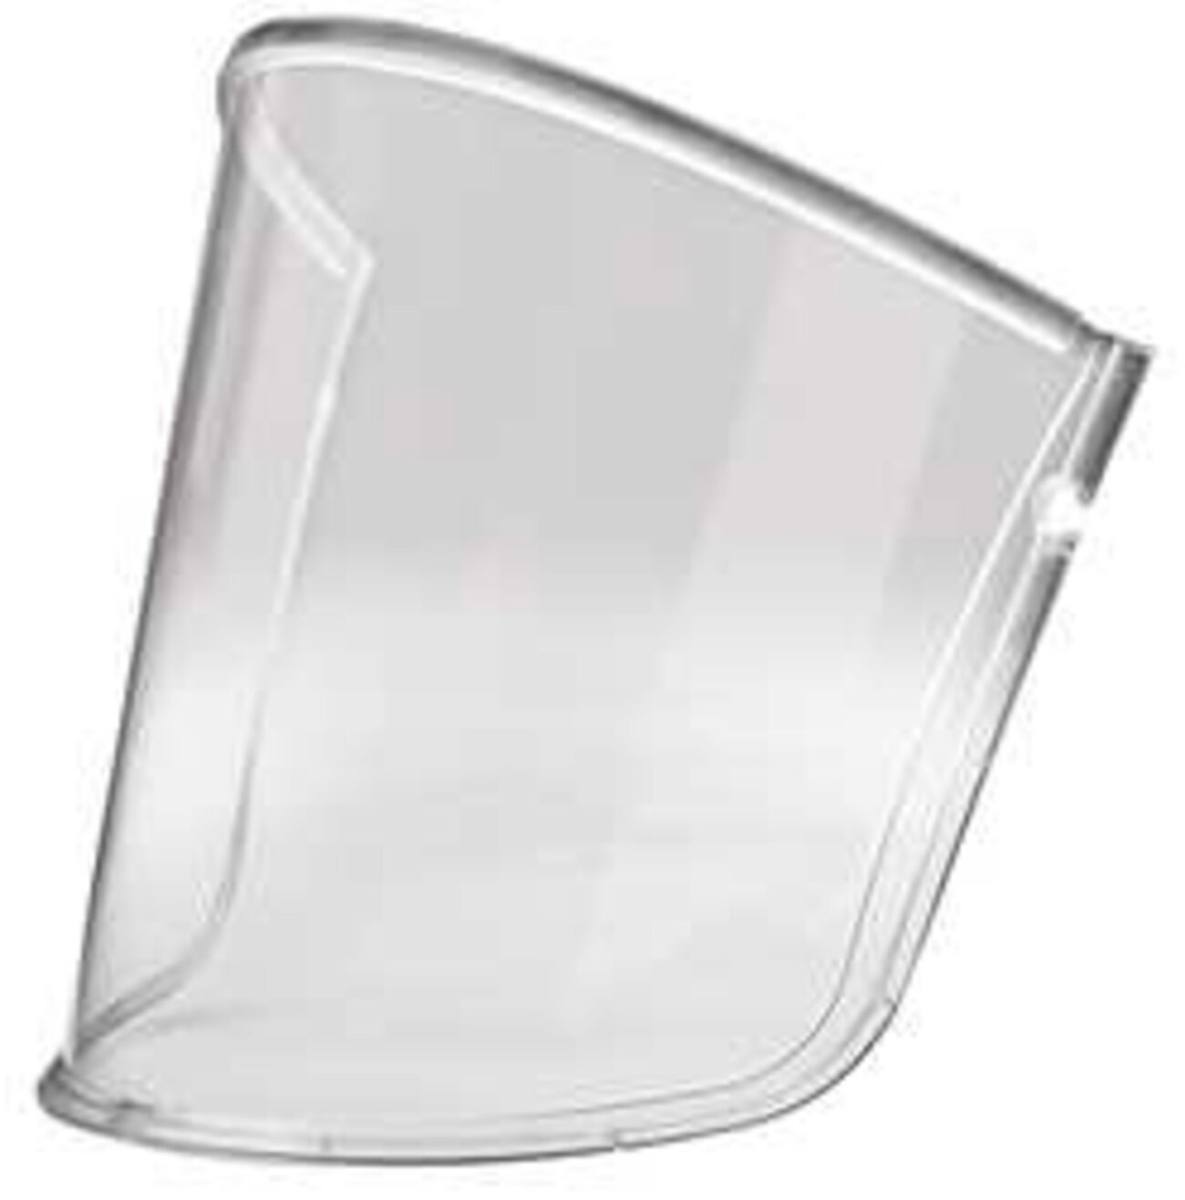 3M Versaflo replacement visor uncoated (protection against molten metal splashes) M925 for M series